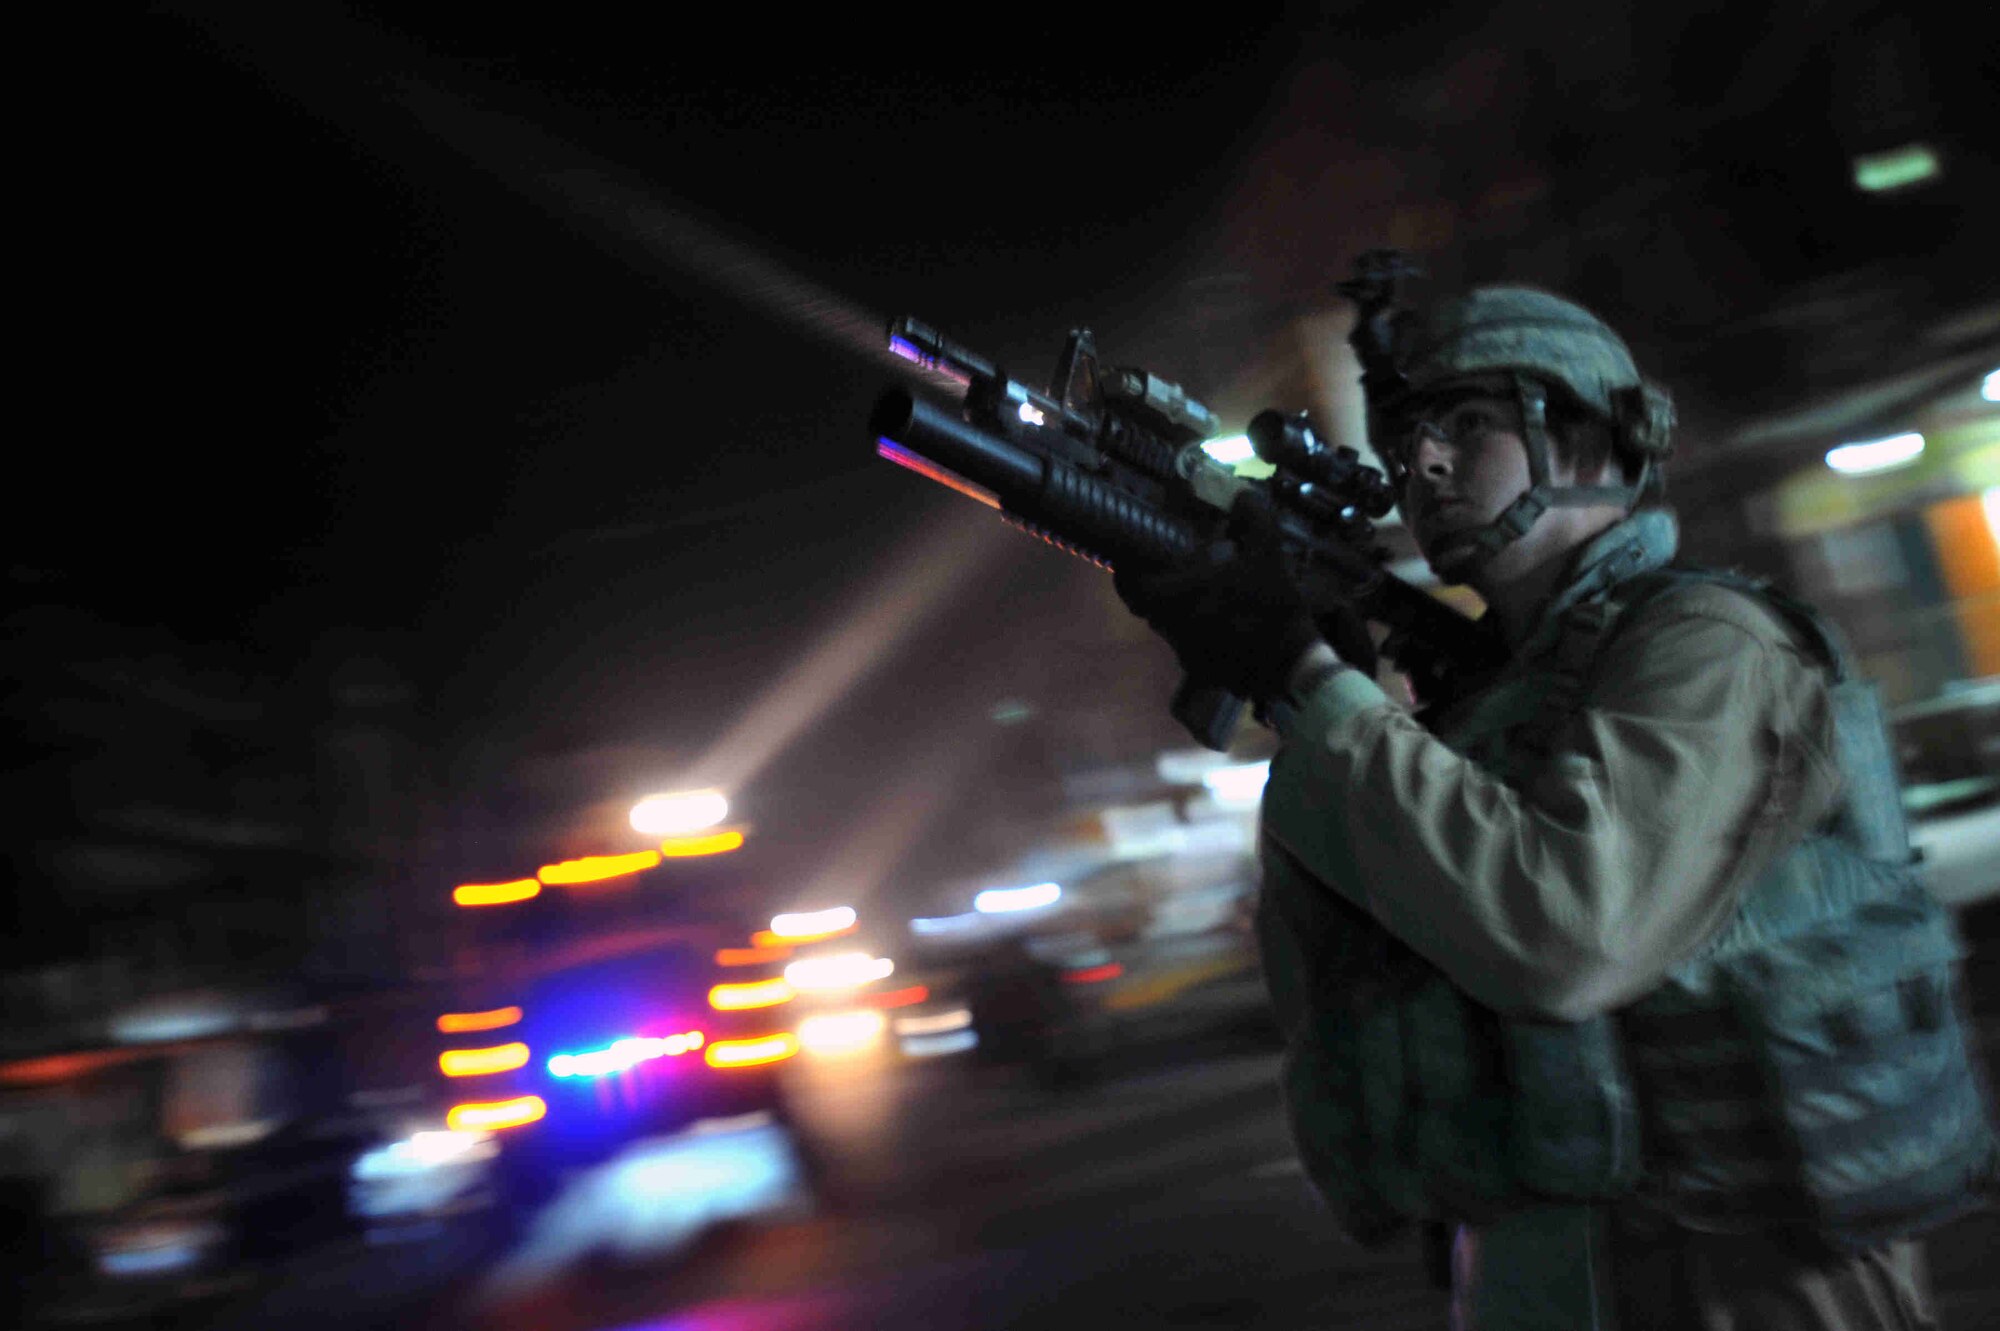 Staff Sgt. Jarrett Cox of Lilburn Ga., scans his perimeter during a joint walking patrol with Iraqi National Policemen in the Sadiah district of southern Baghdad, Iraq, Dec. 17, 2008. (U.S. Navy Photo by Petty Officer 2nd Class Todd Frantom)